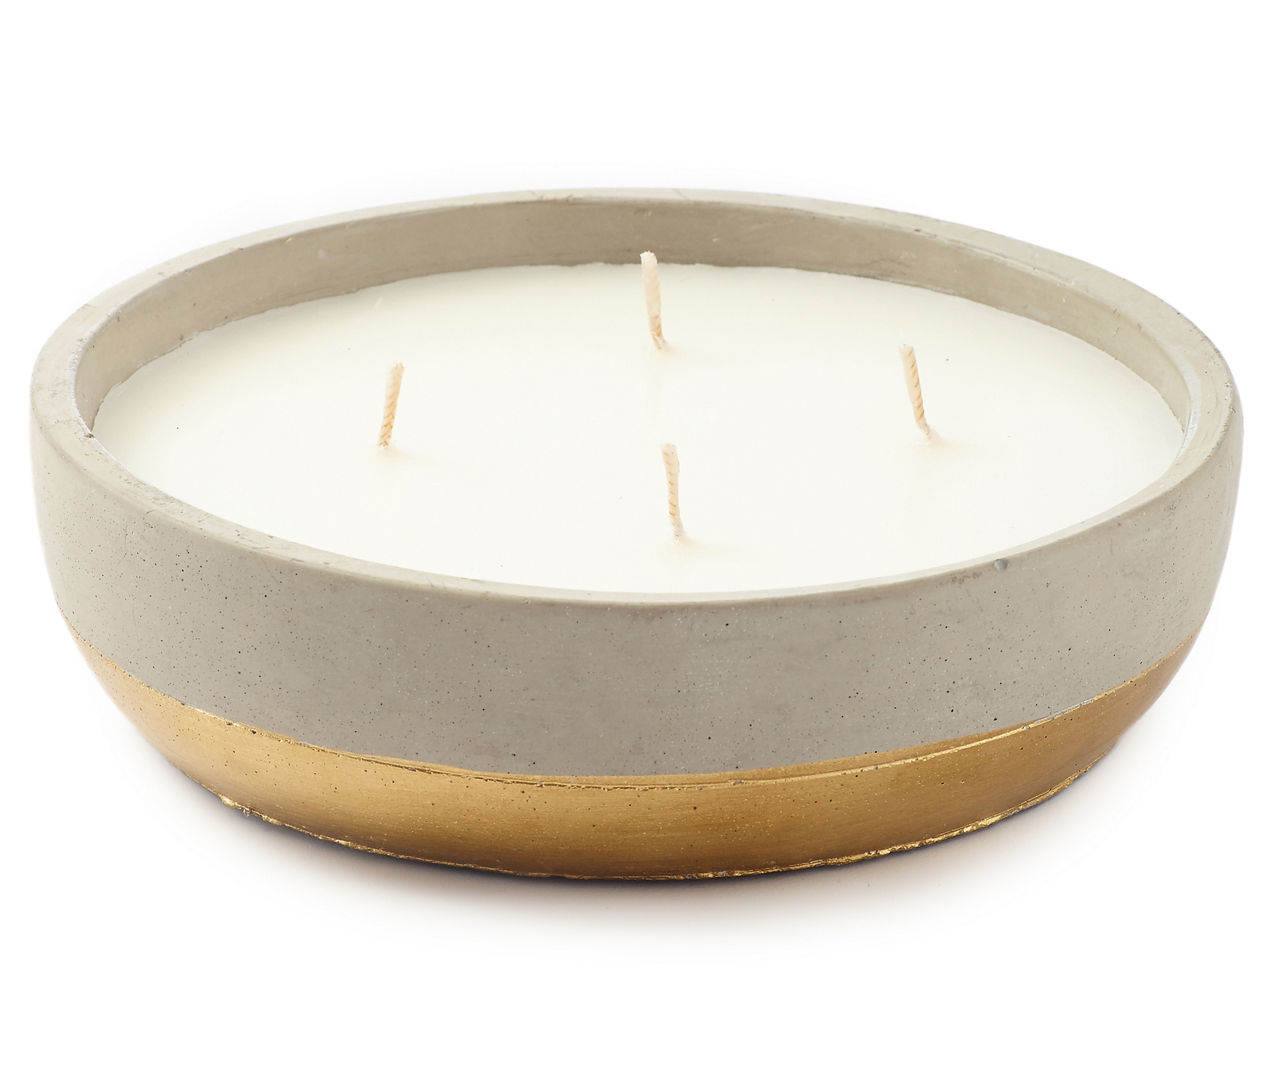 Coconut Orchid Cement Candle, 16 oz. | Big Lots